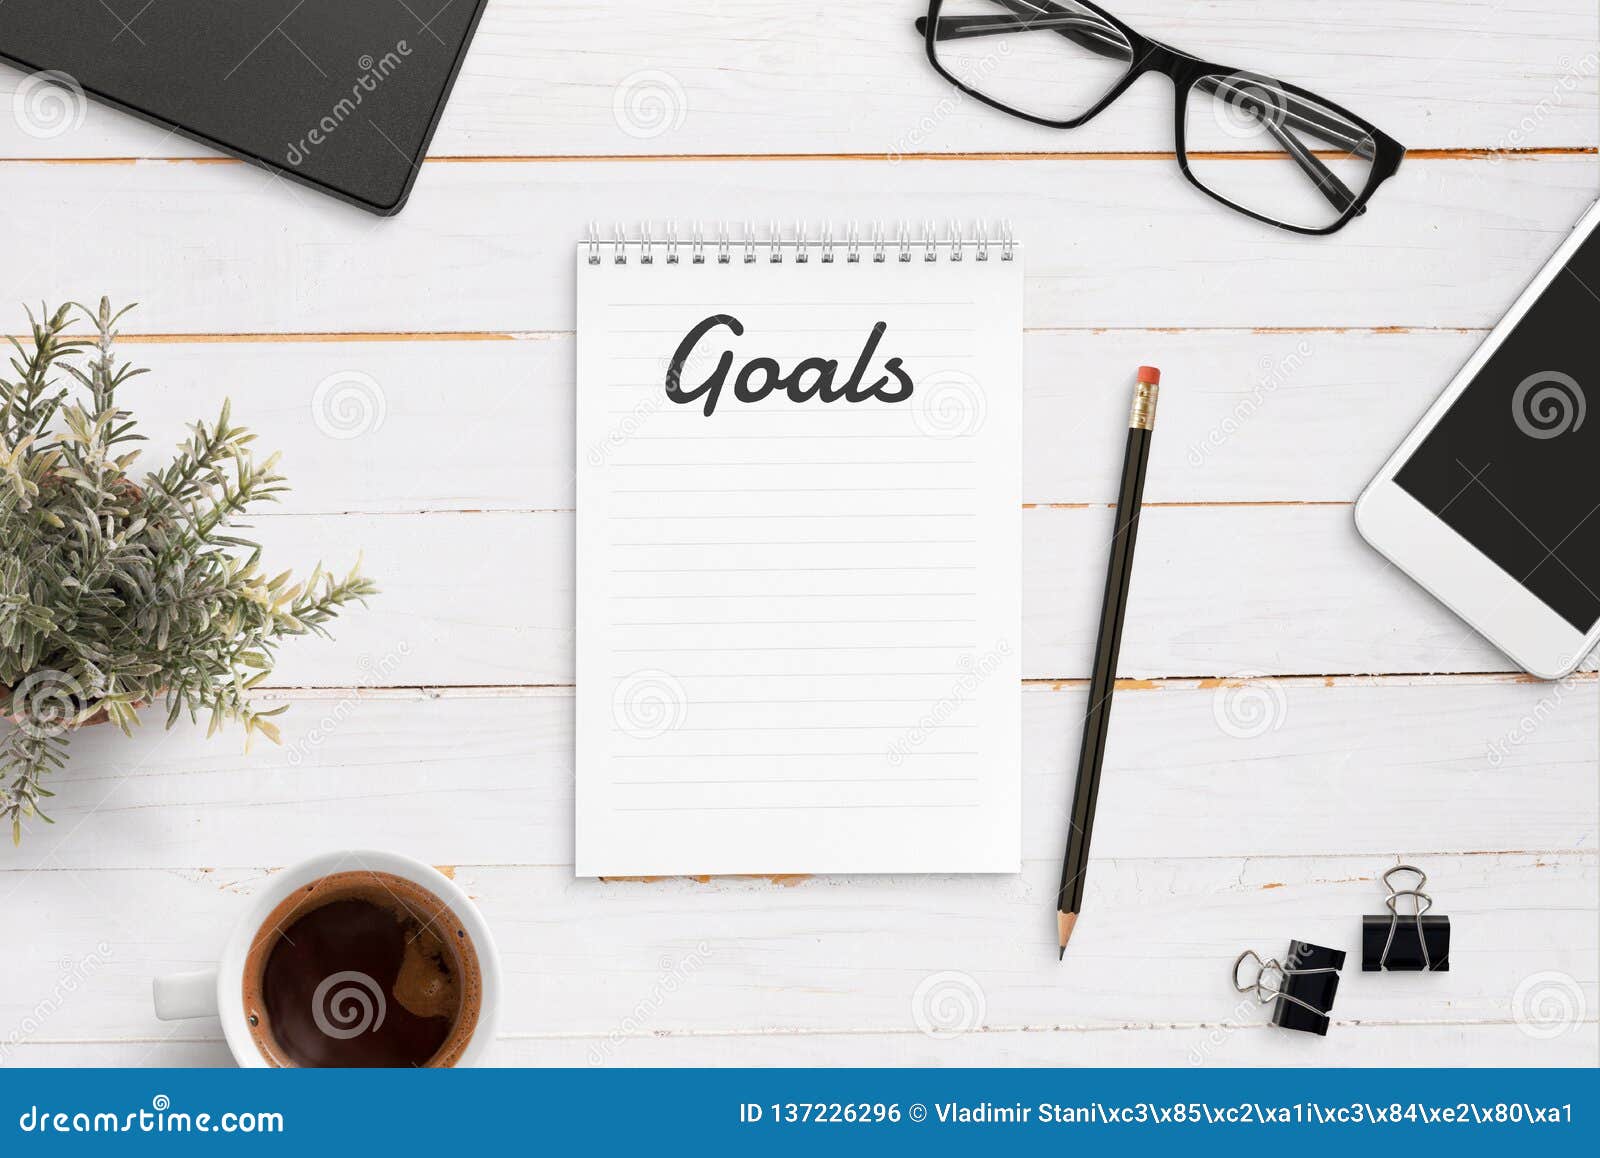 Goals List Notepad Mockup On Office Desk Surrounded With Smart